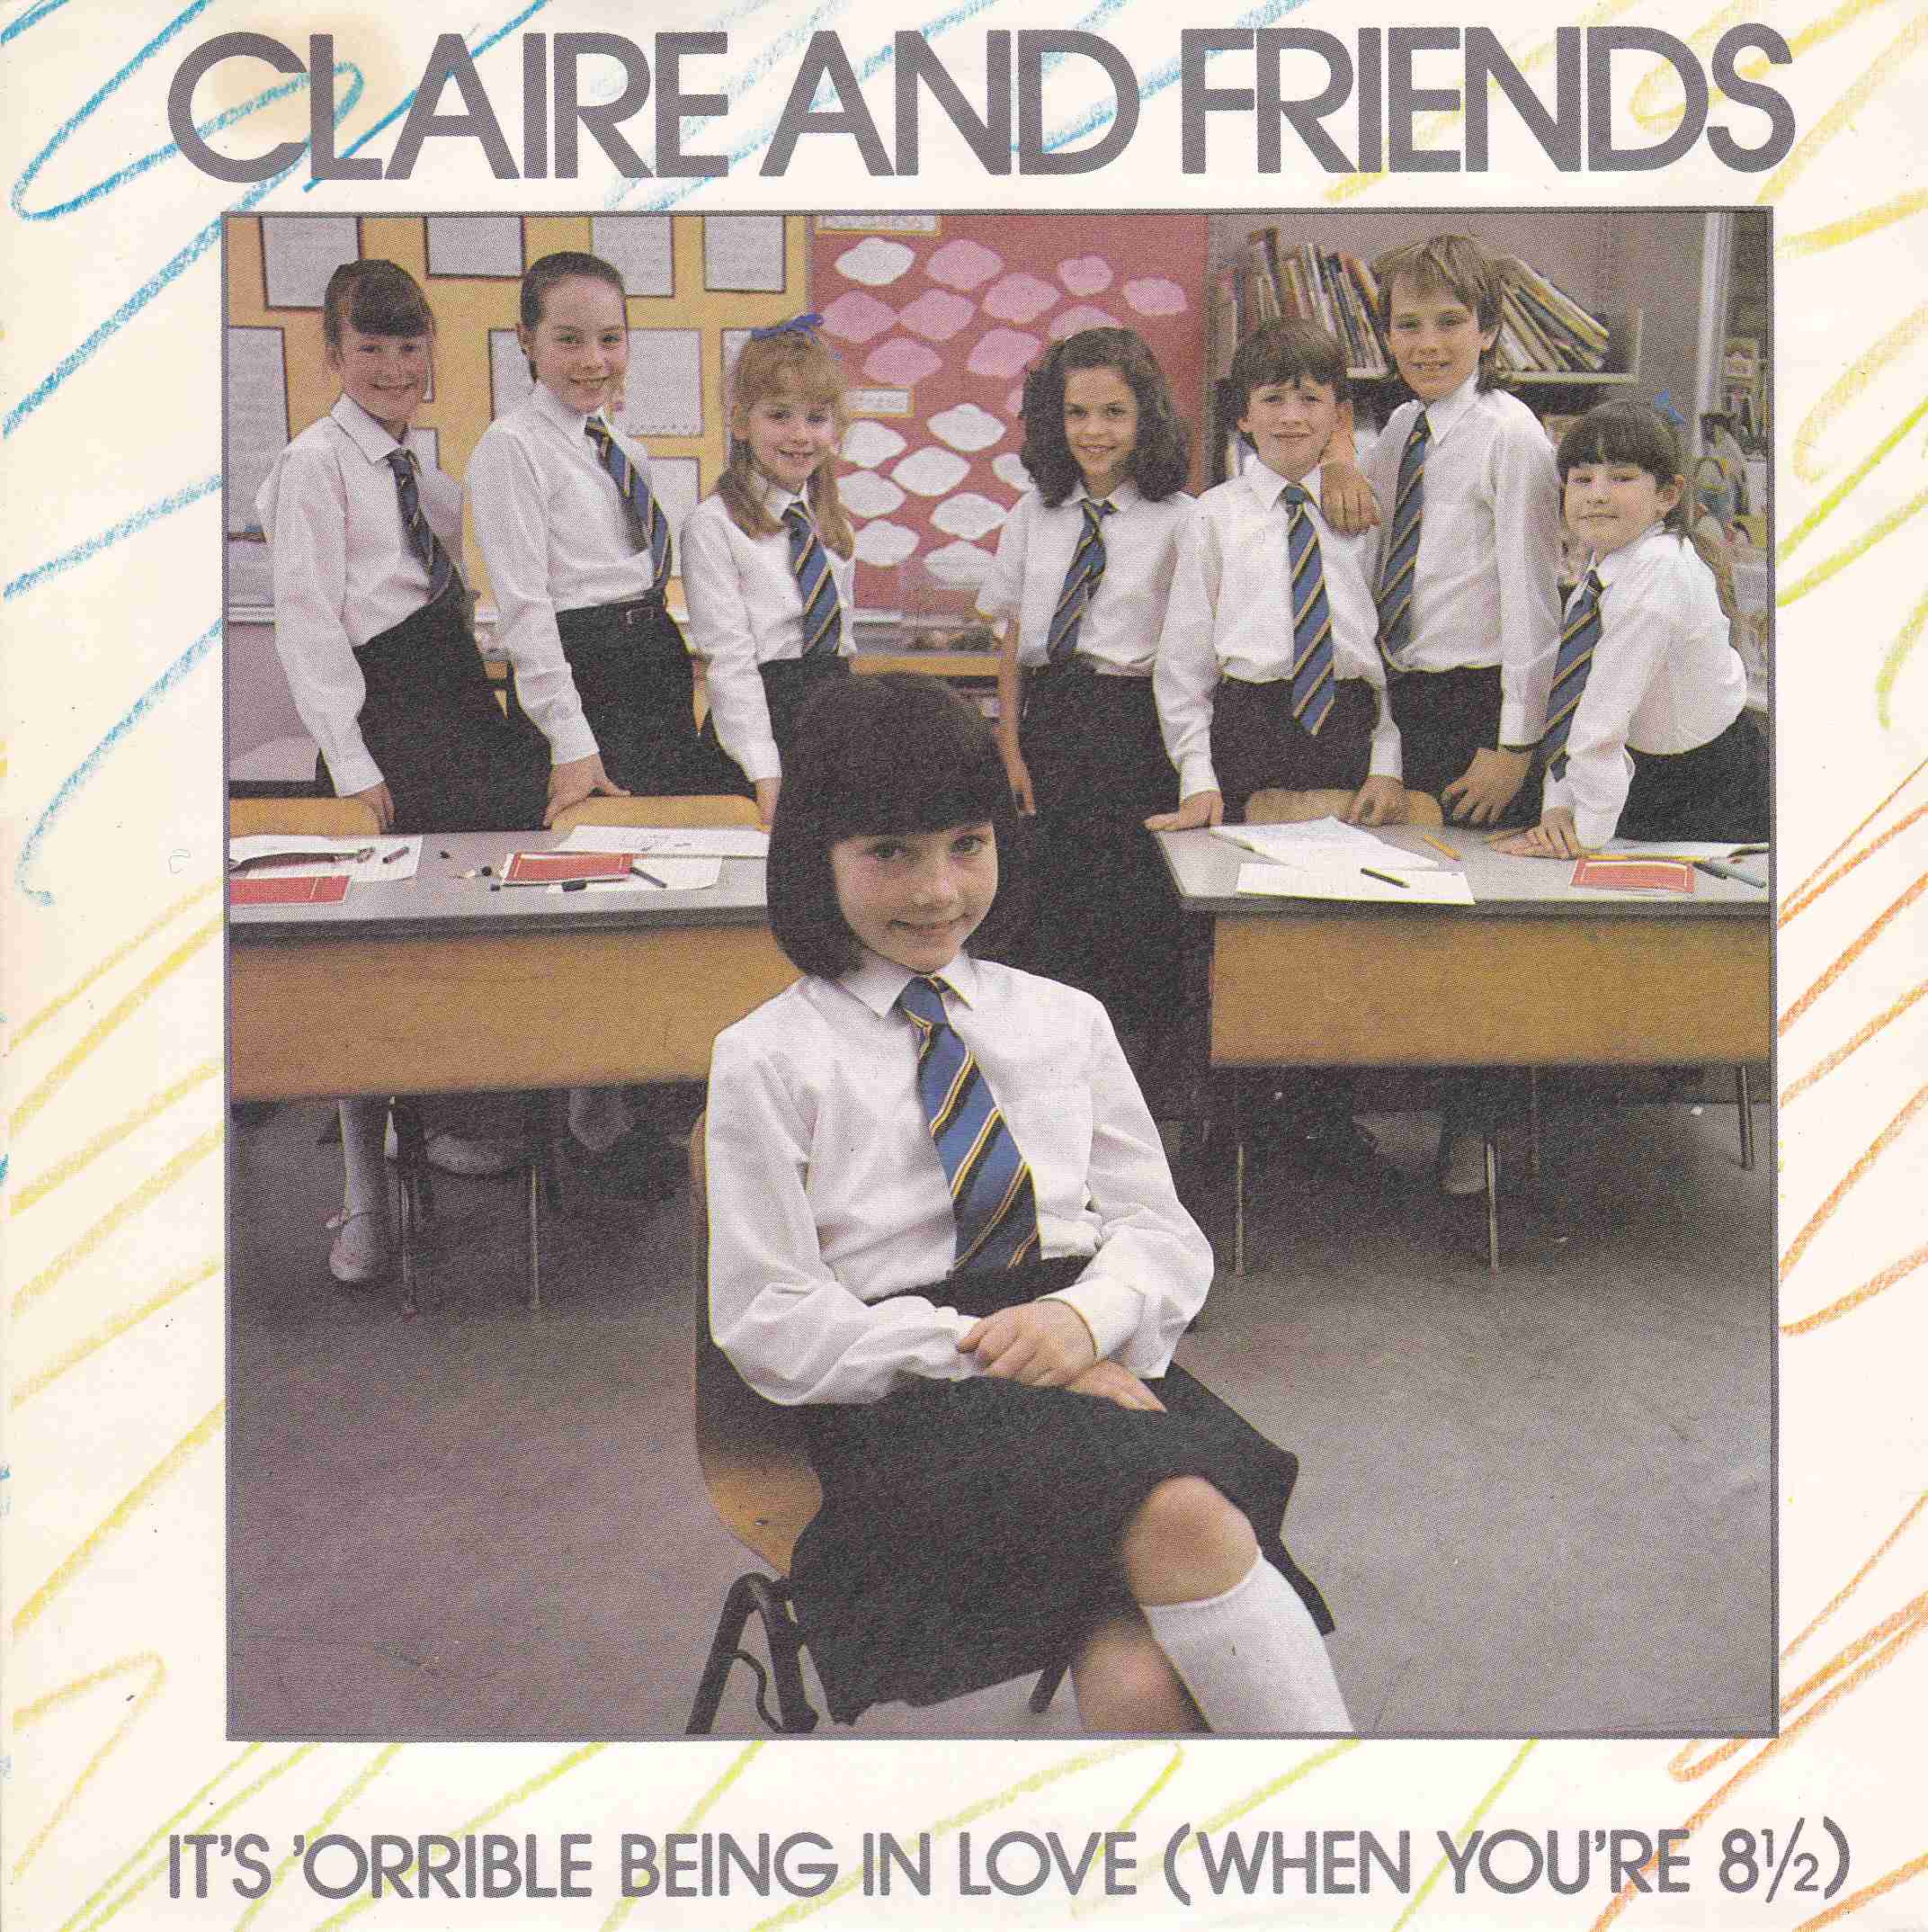 Picture of RESL 189 It's 'orrible being in love (when you're 8 1/2) by artist Mick Coleman / Kevin Parrott / Claire and Friends (Claire Usher) from the BBC singles - Records and Tapes library